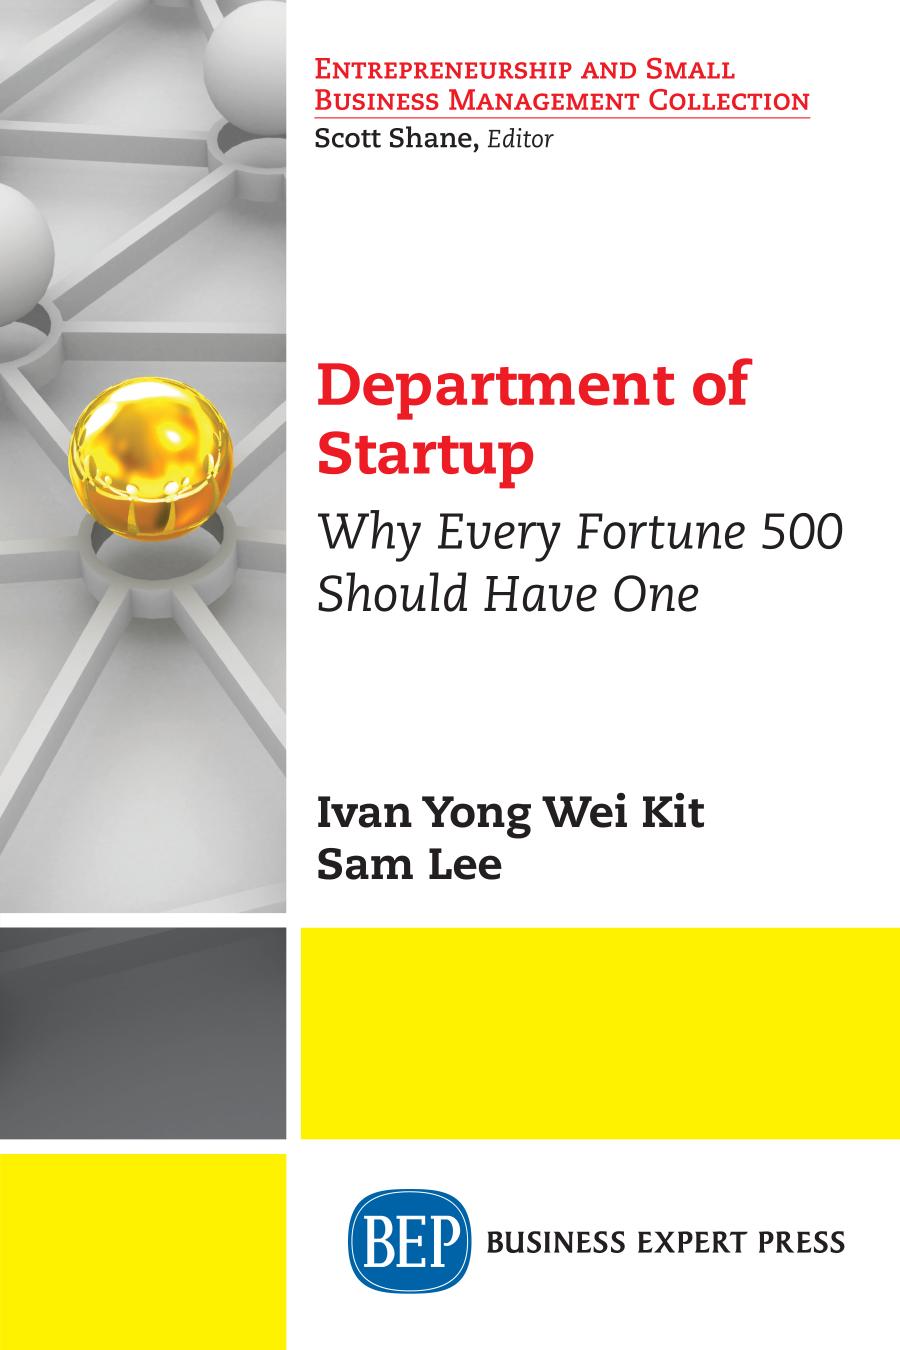 The Department of Startup : Why Every Fortune 500 Should Have One